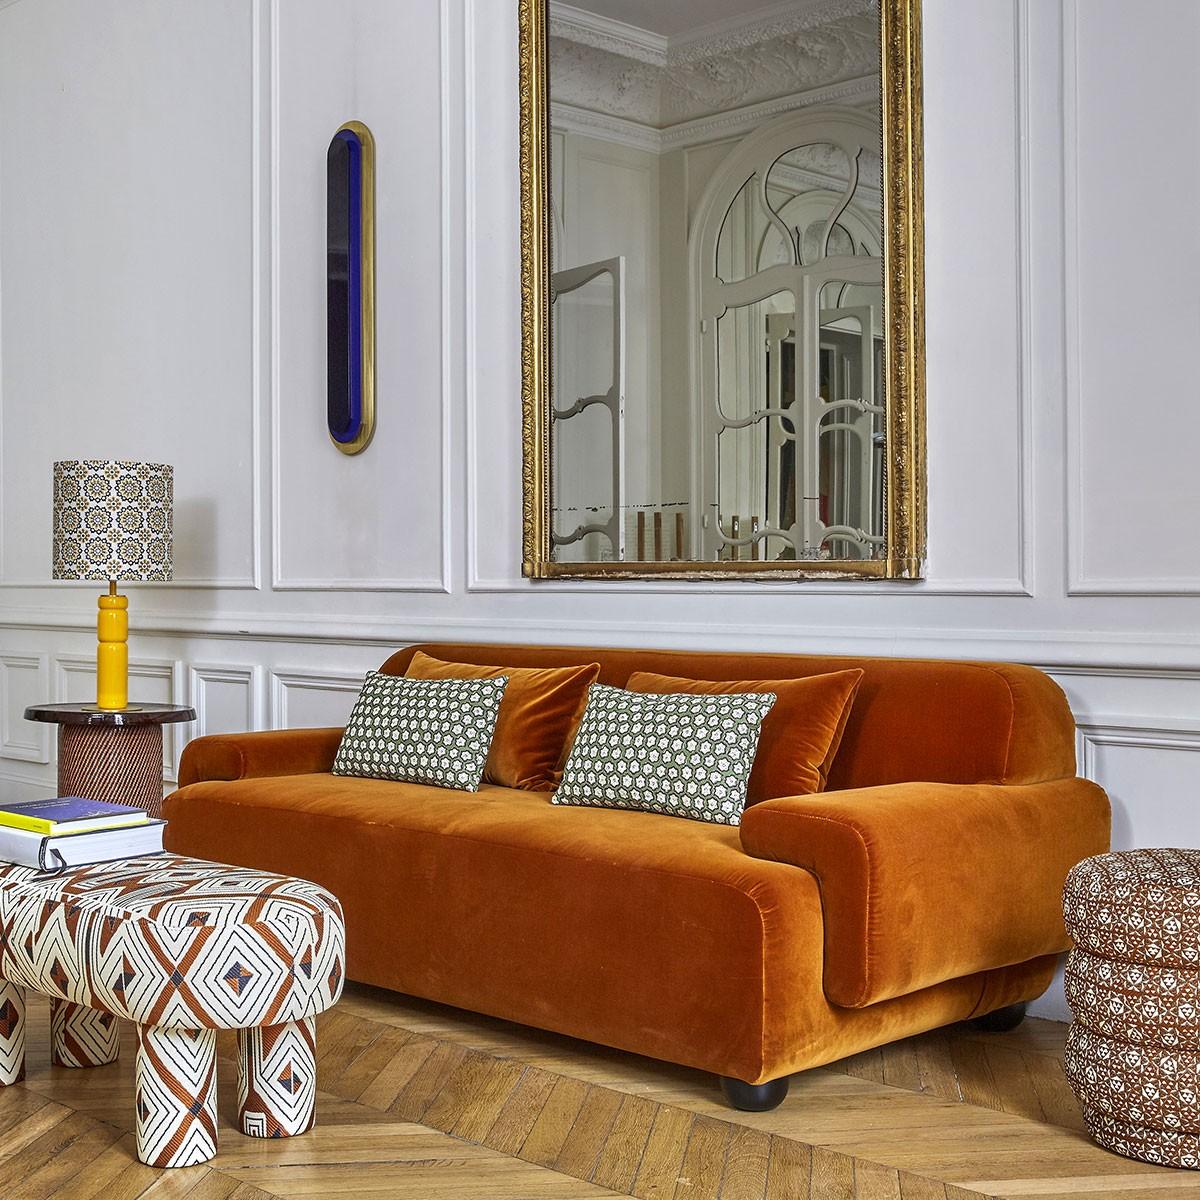 Popus editions lena 4 seater sofa in brown verone velvet upholstery.

It looks like it's straight out of a movie, with its generous curves and wide armrests. It is a real invitation to spend long Sundays with the family, comfortably seated in